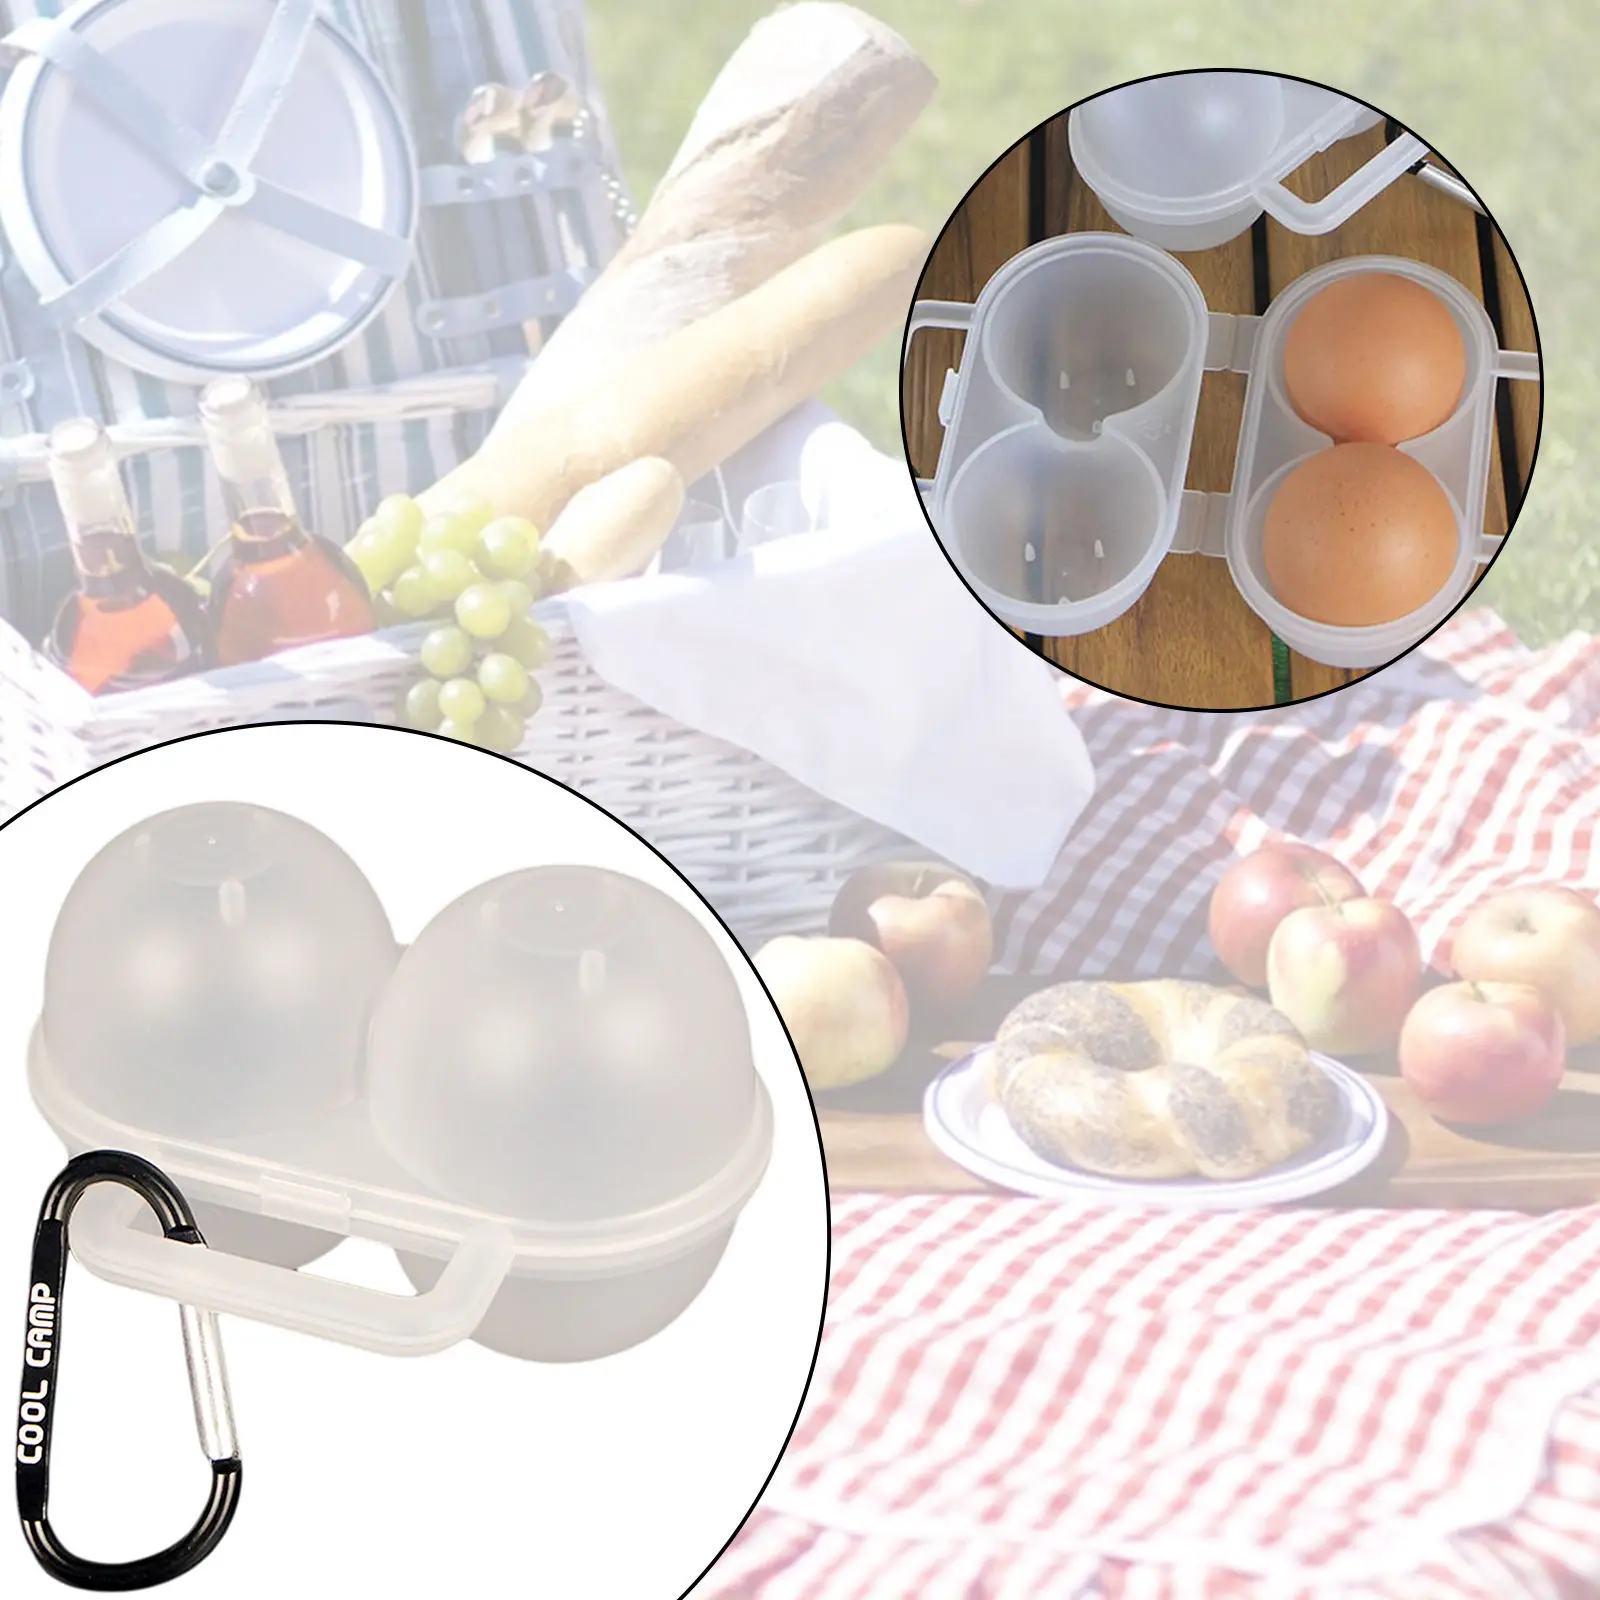 Portable Camping Carrier for 2 Eggs Case Box Convenient Container Egg Storage Box Container Hiking Outdoor Kitchen Tools